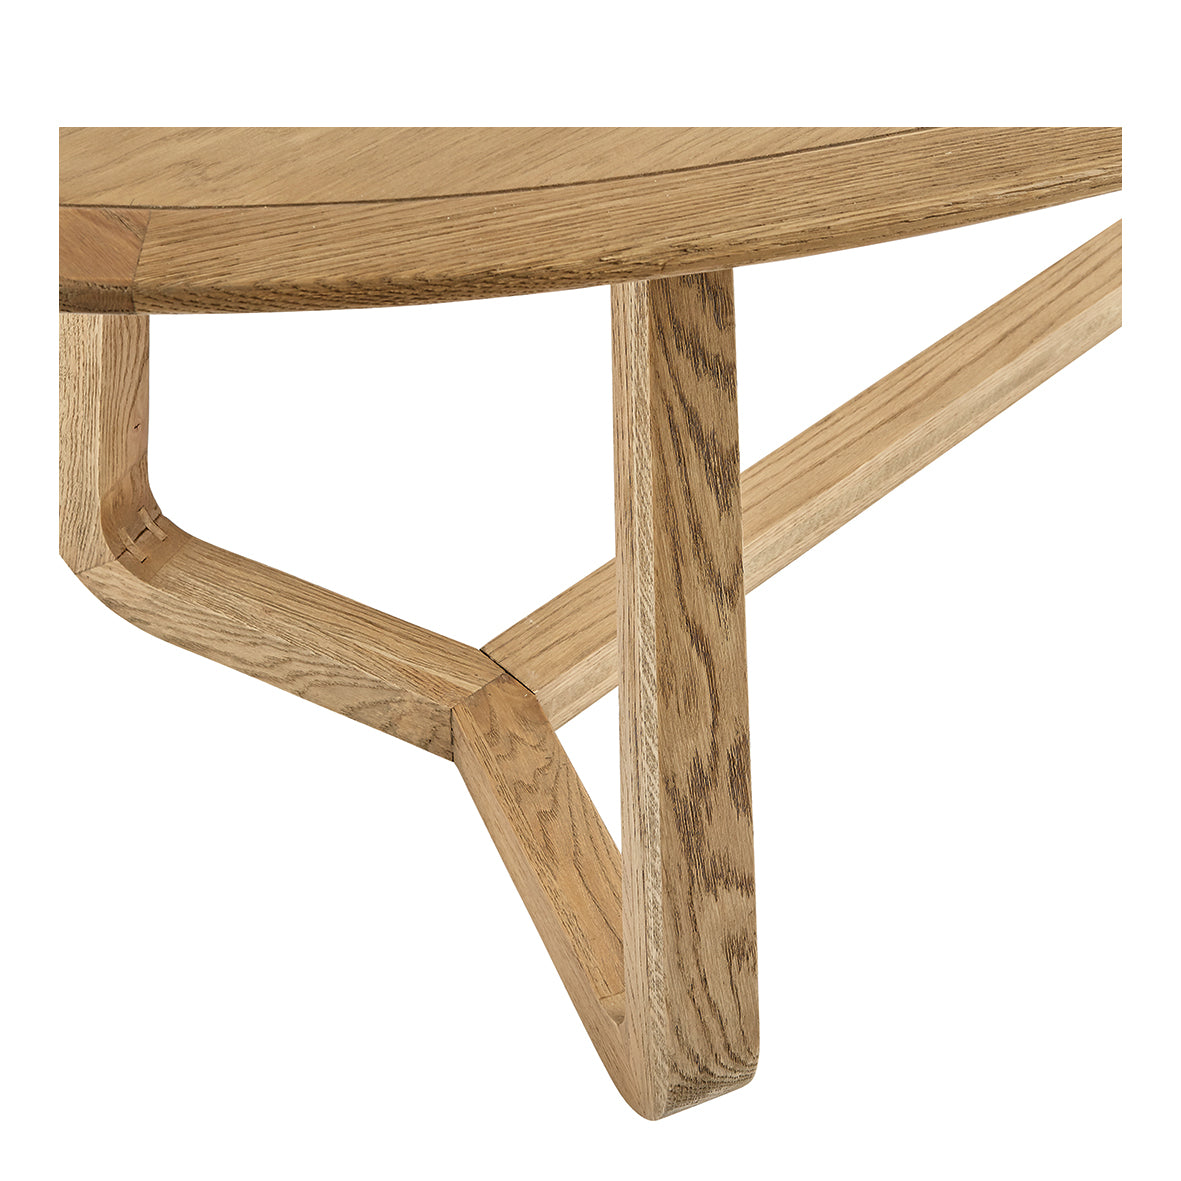 Maxime dining table